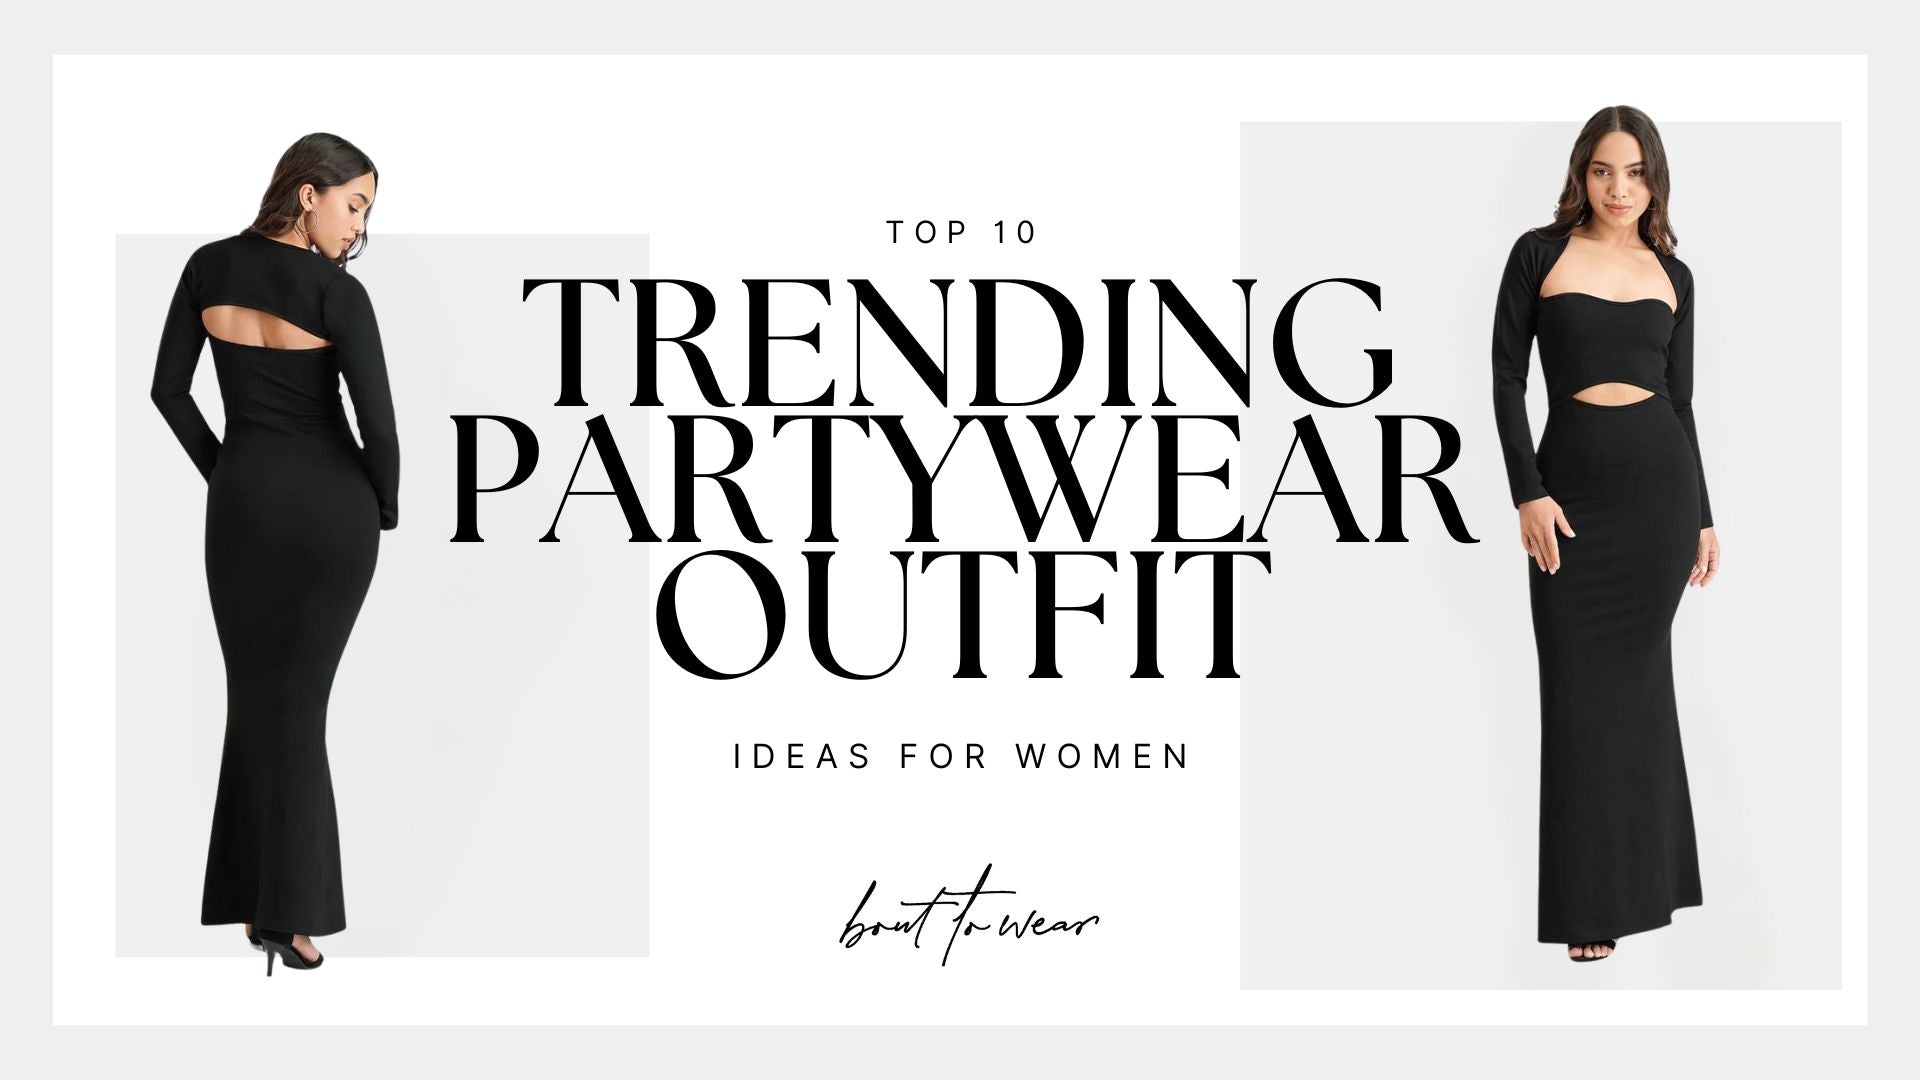 Top 10 Trending Partywear Outfit Ideas for Women